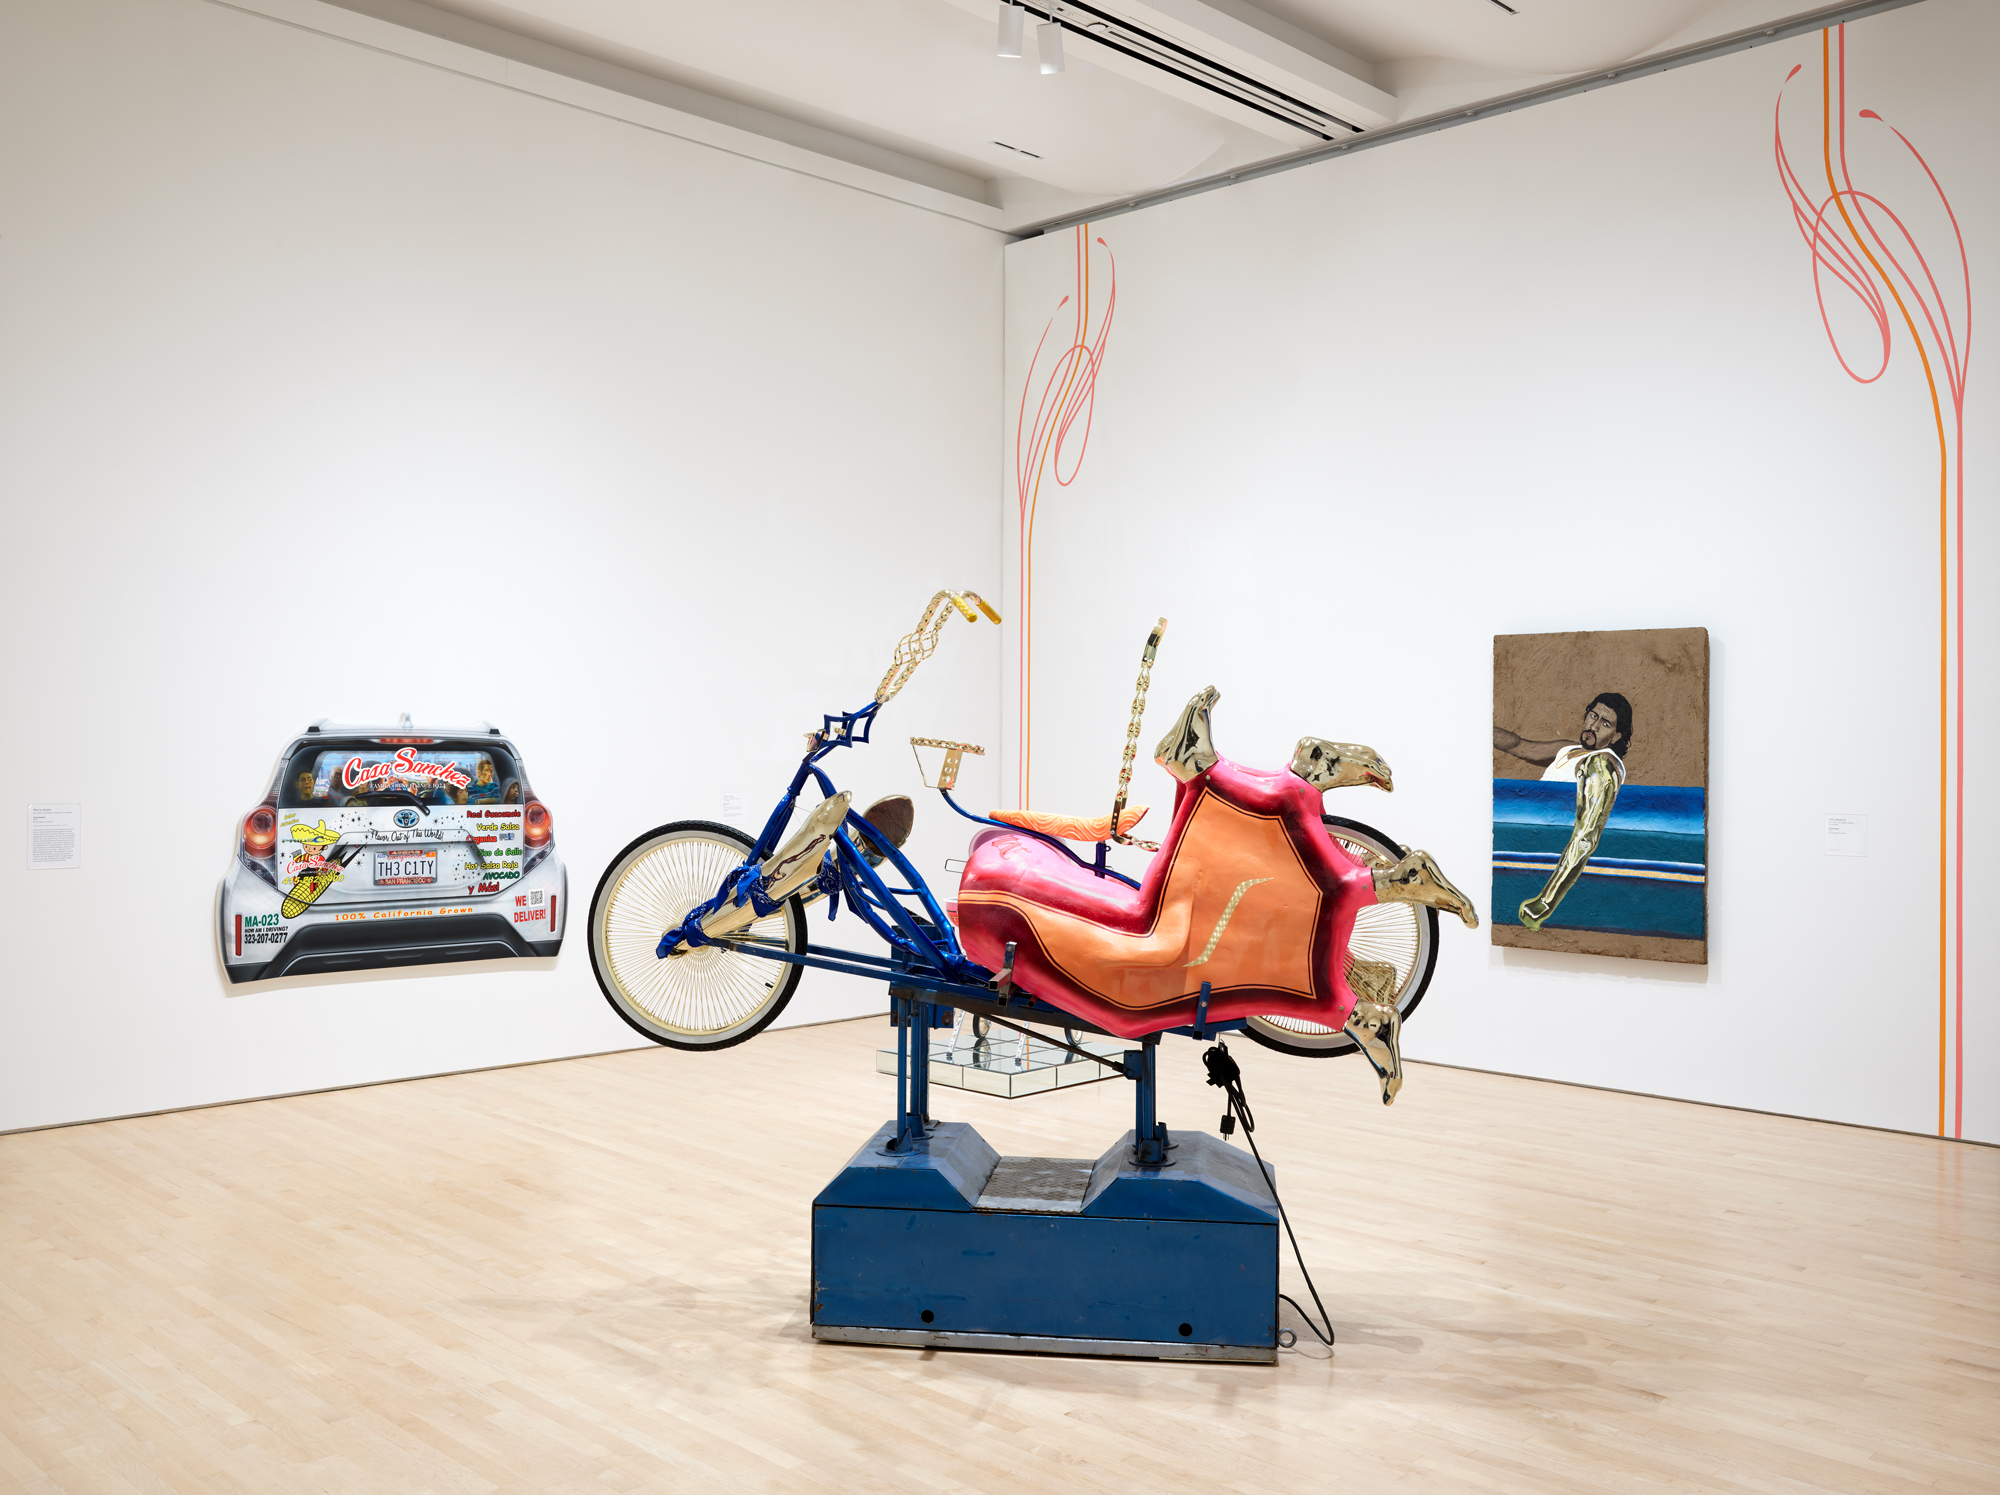 White gallery with two painting hanging on walls, one car-shaped, and a mechanical sculpture in the middle